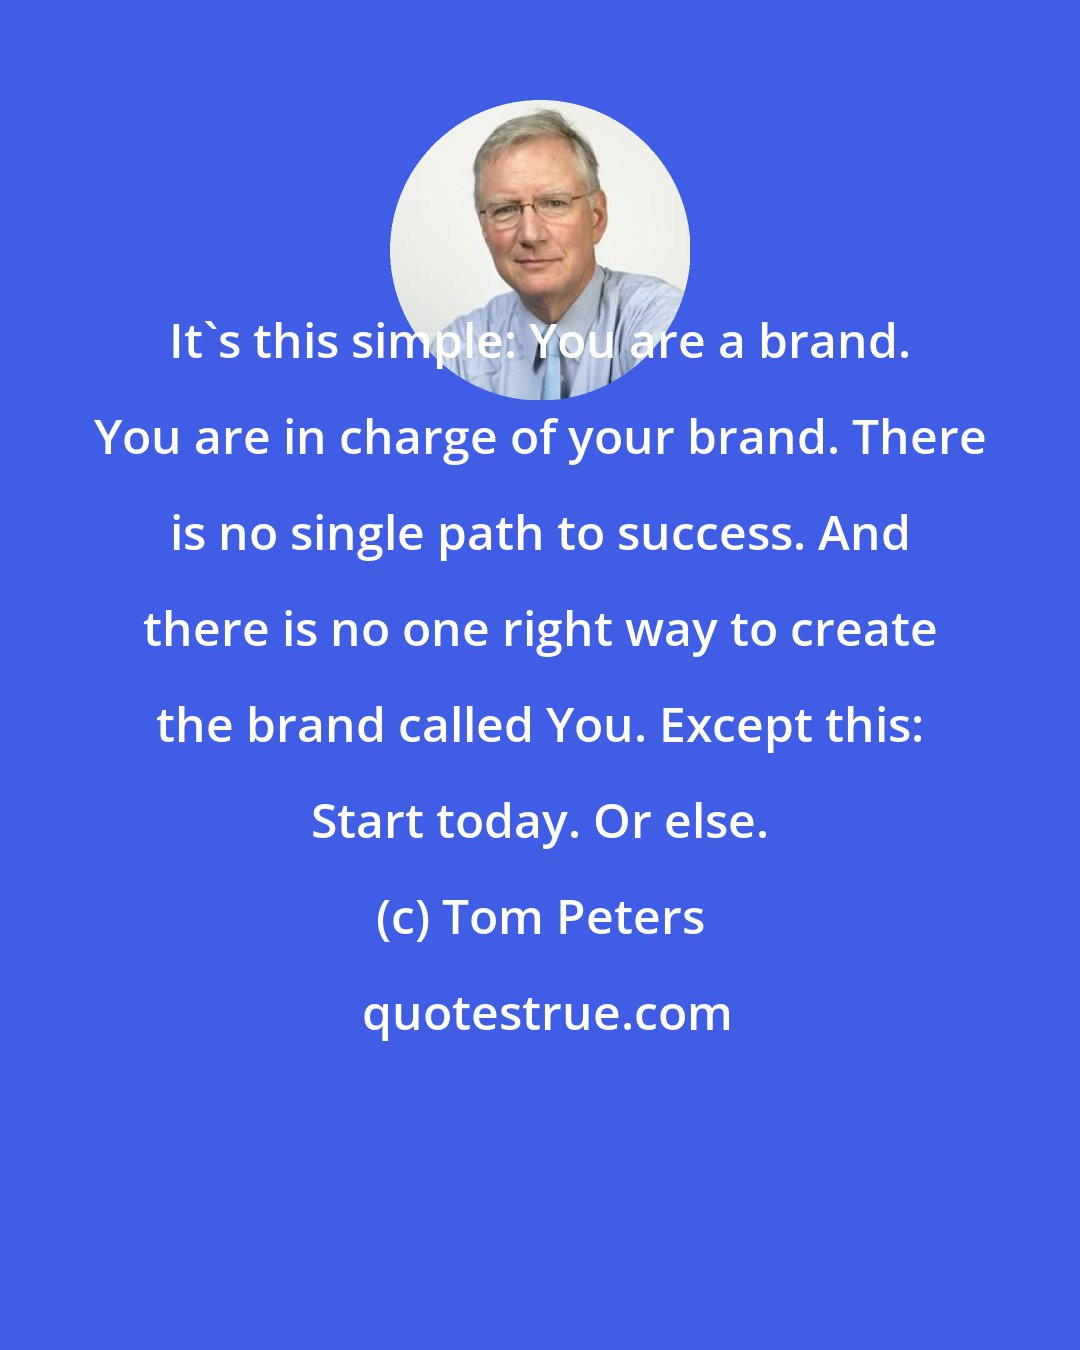 Tom Peters: It's this simple: You are a brand. You are in charge of your brand. There is no single path to success. And there is no one right way to create the brand called You. Except this: Start today. Or else.